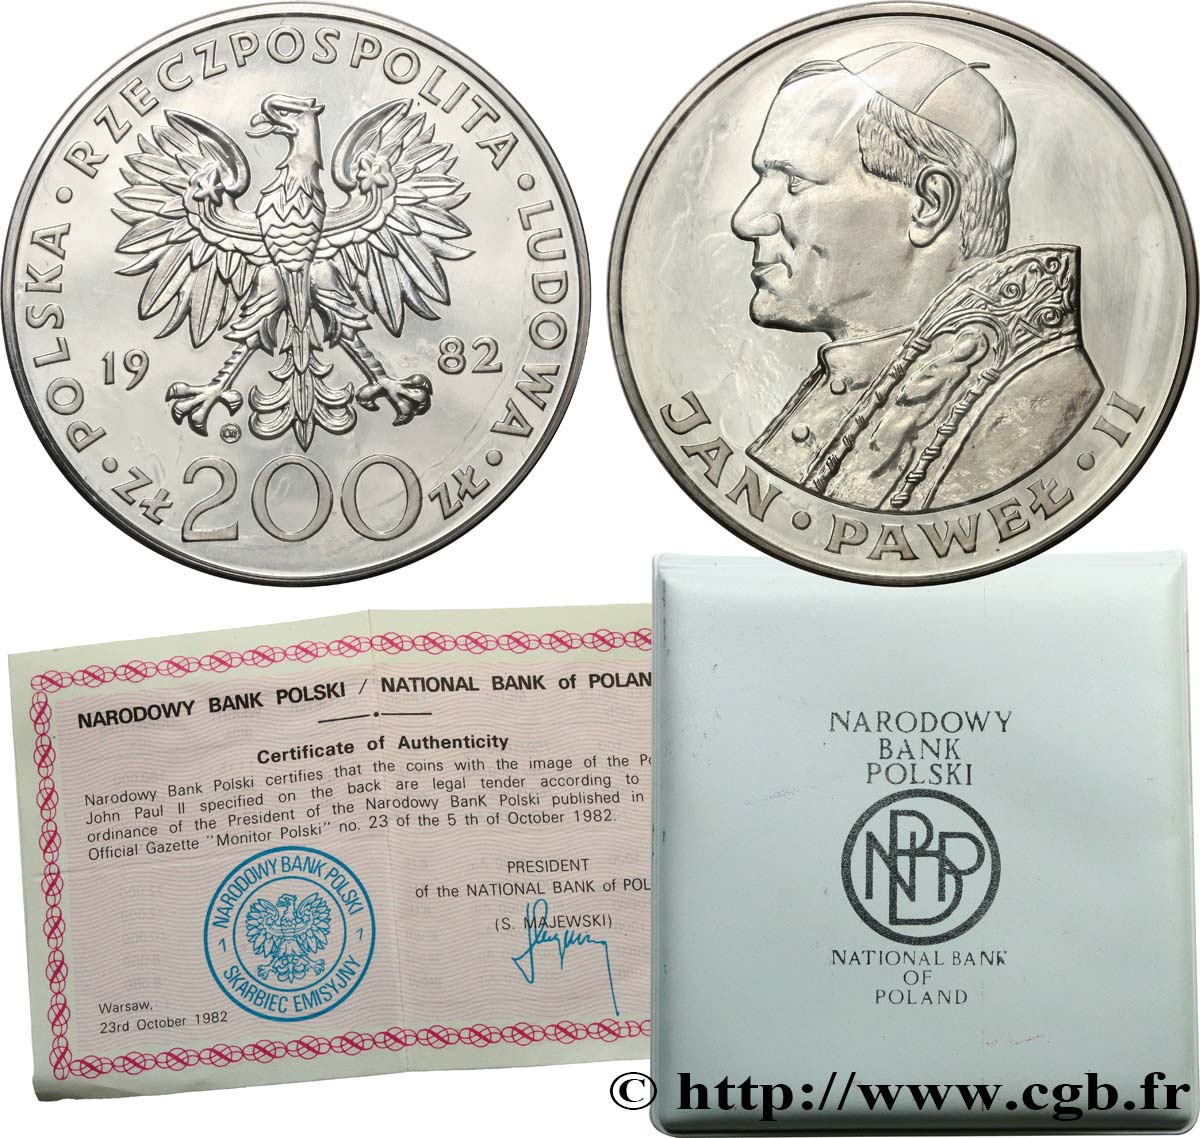 POLAND 200 Zlotych Proof visite du pape Jean-Paul II 1982  MS 